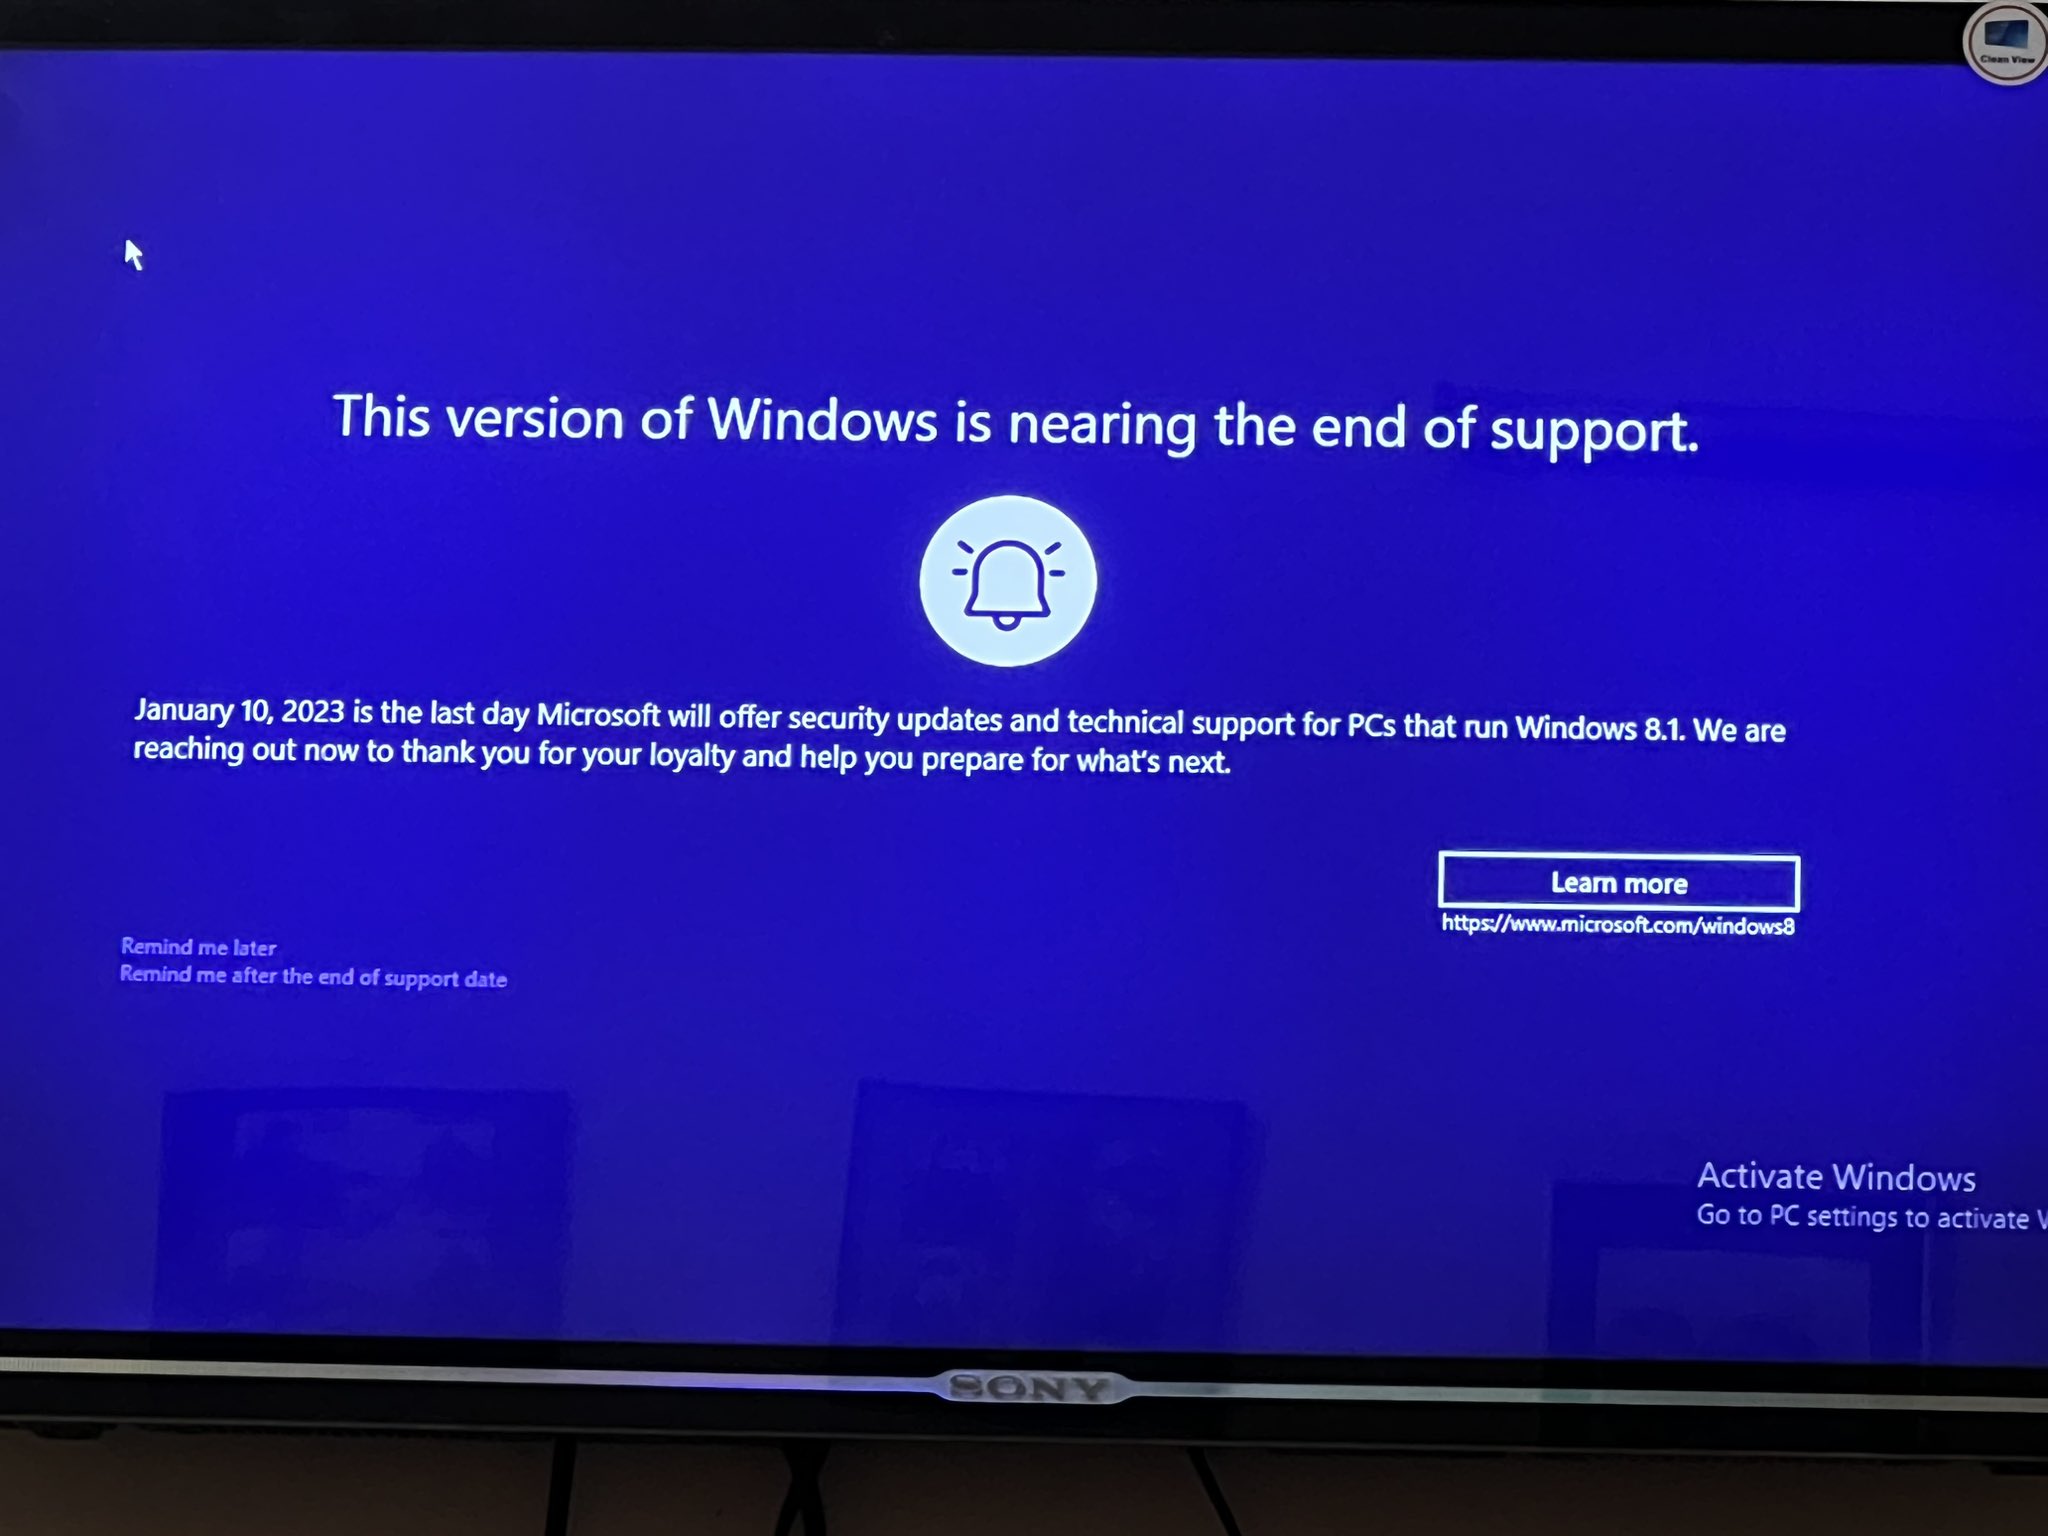 When will Microsoft end support for your version of Windows or